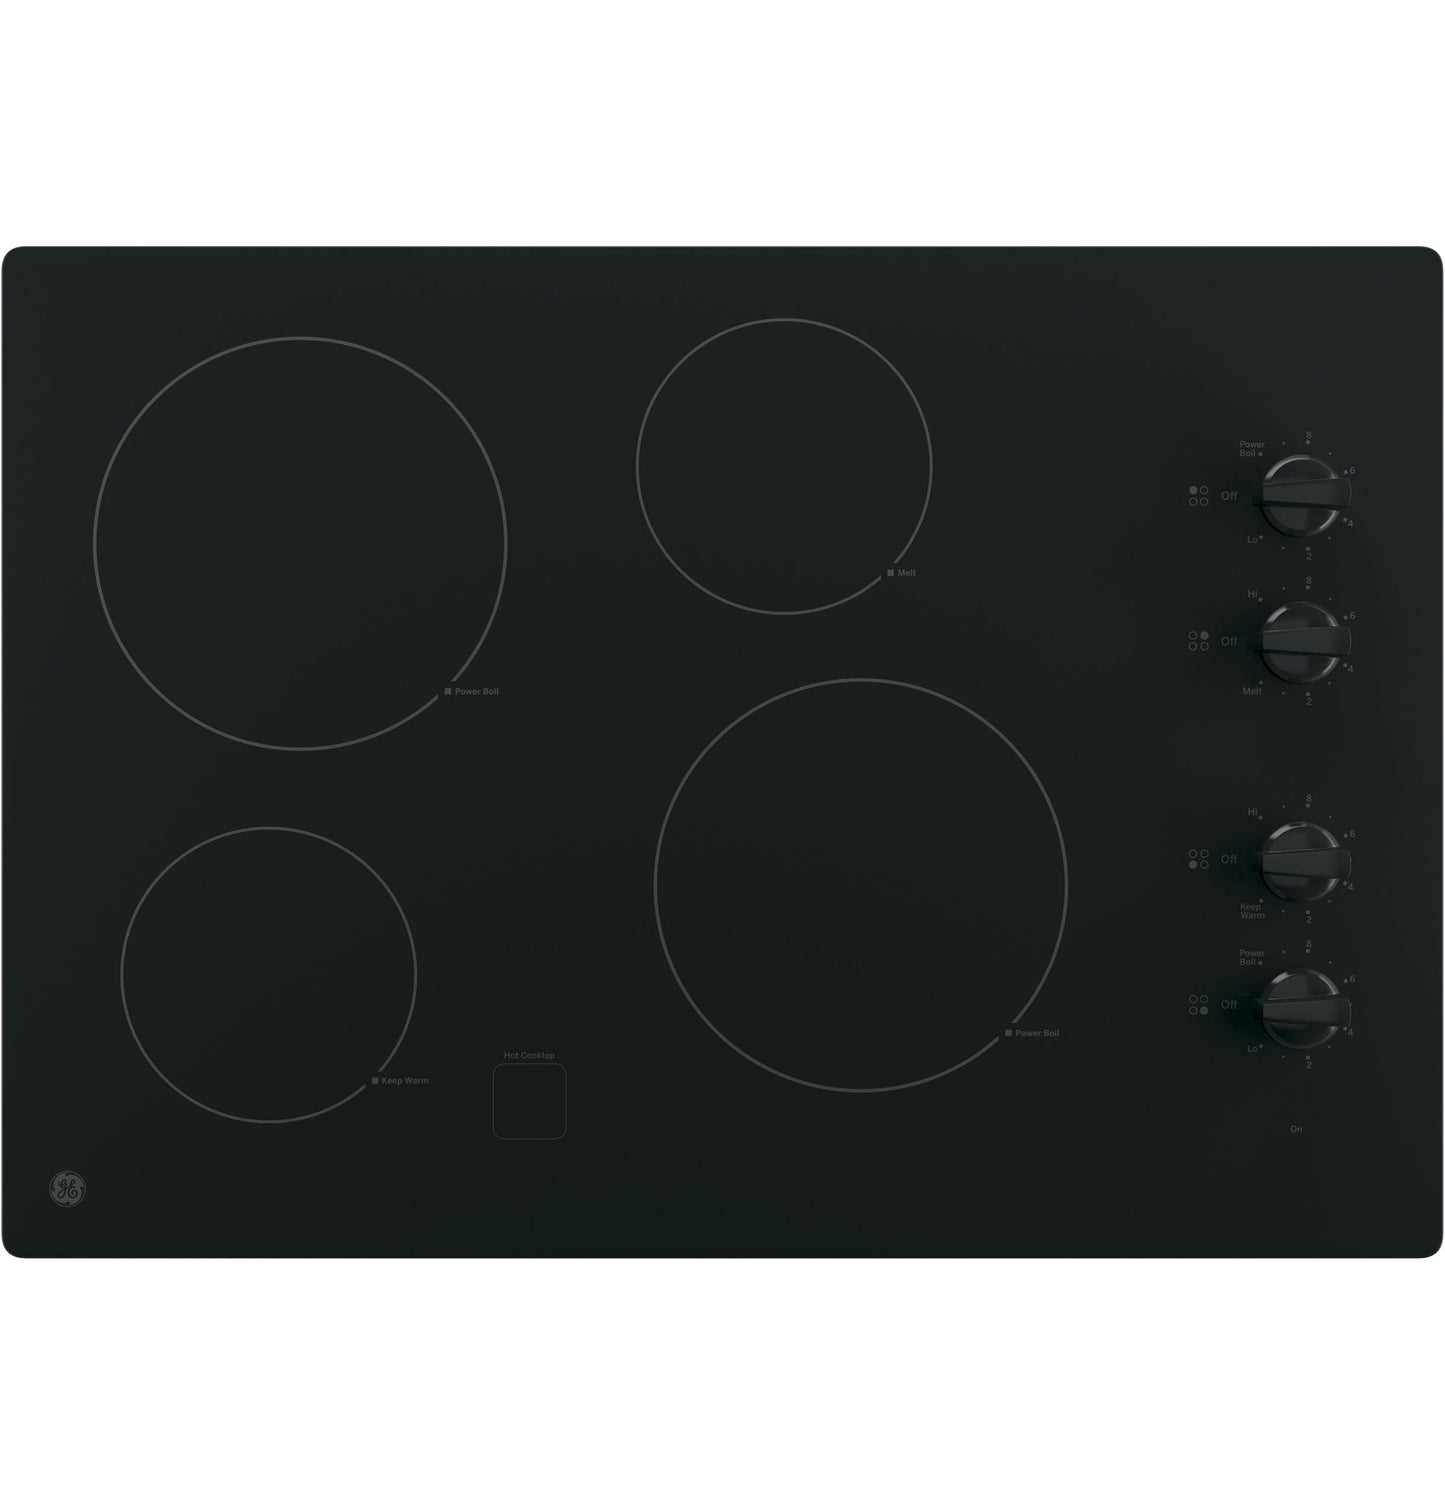 GE JP3030DJBB 30 Inch Smoothtop Electric Cooktop with 4 Radiant Elements, Knob Controls, Keep Warm Melt Setting, Black